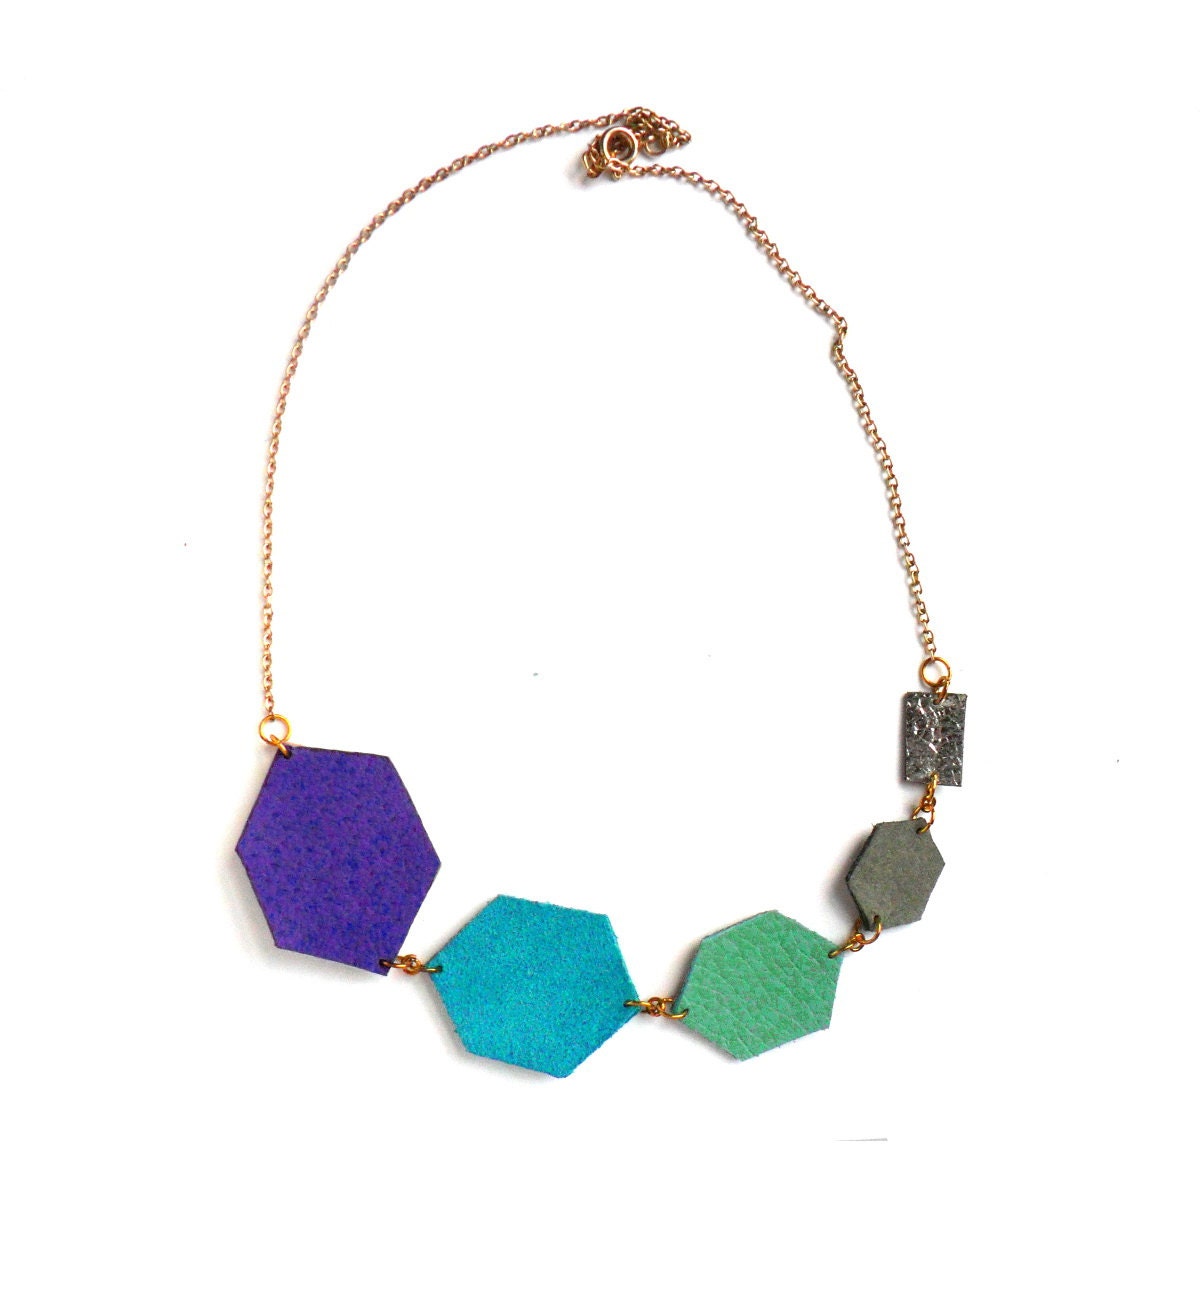 Geometric leather necklace in blue, grey, mint and purple diamond shapes